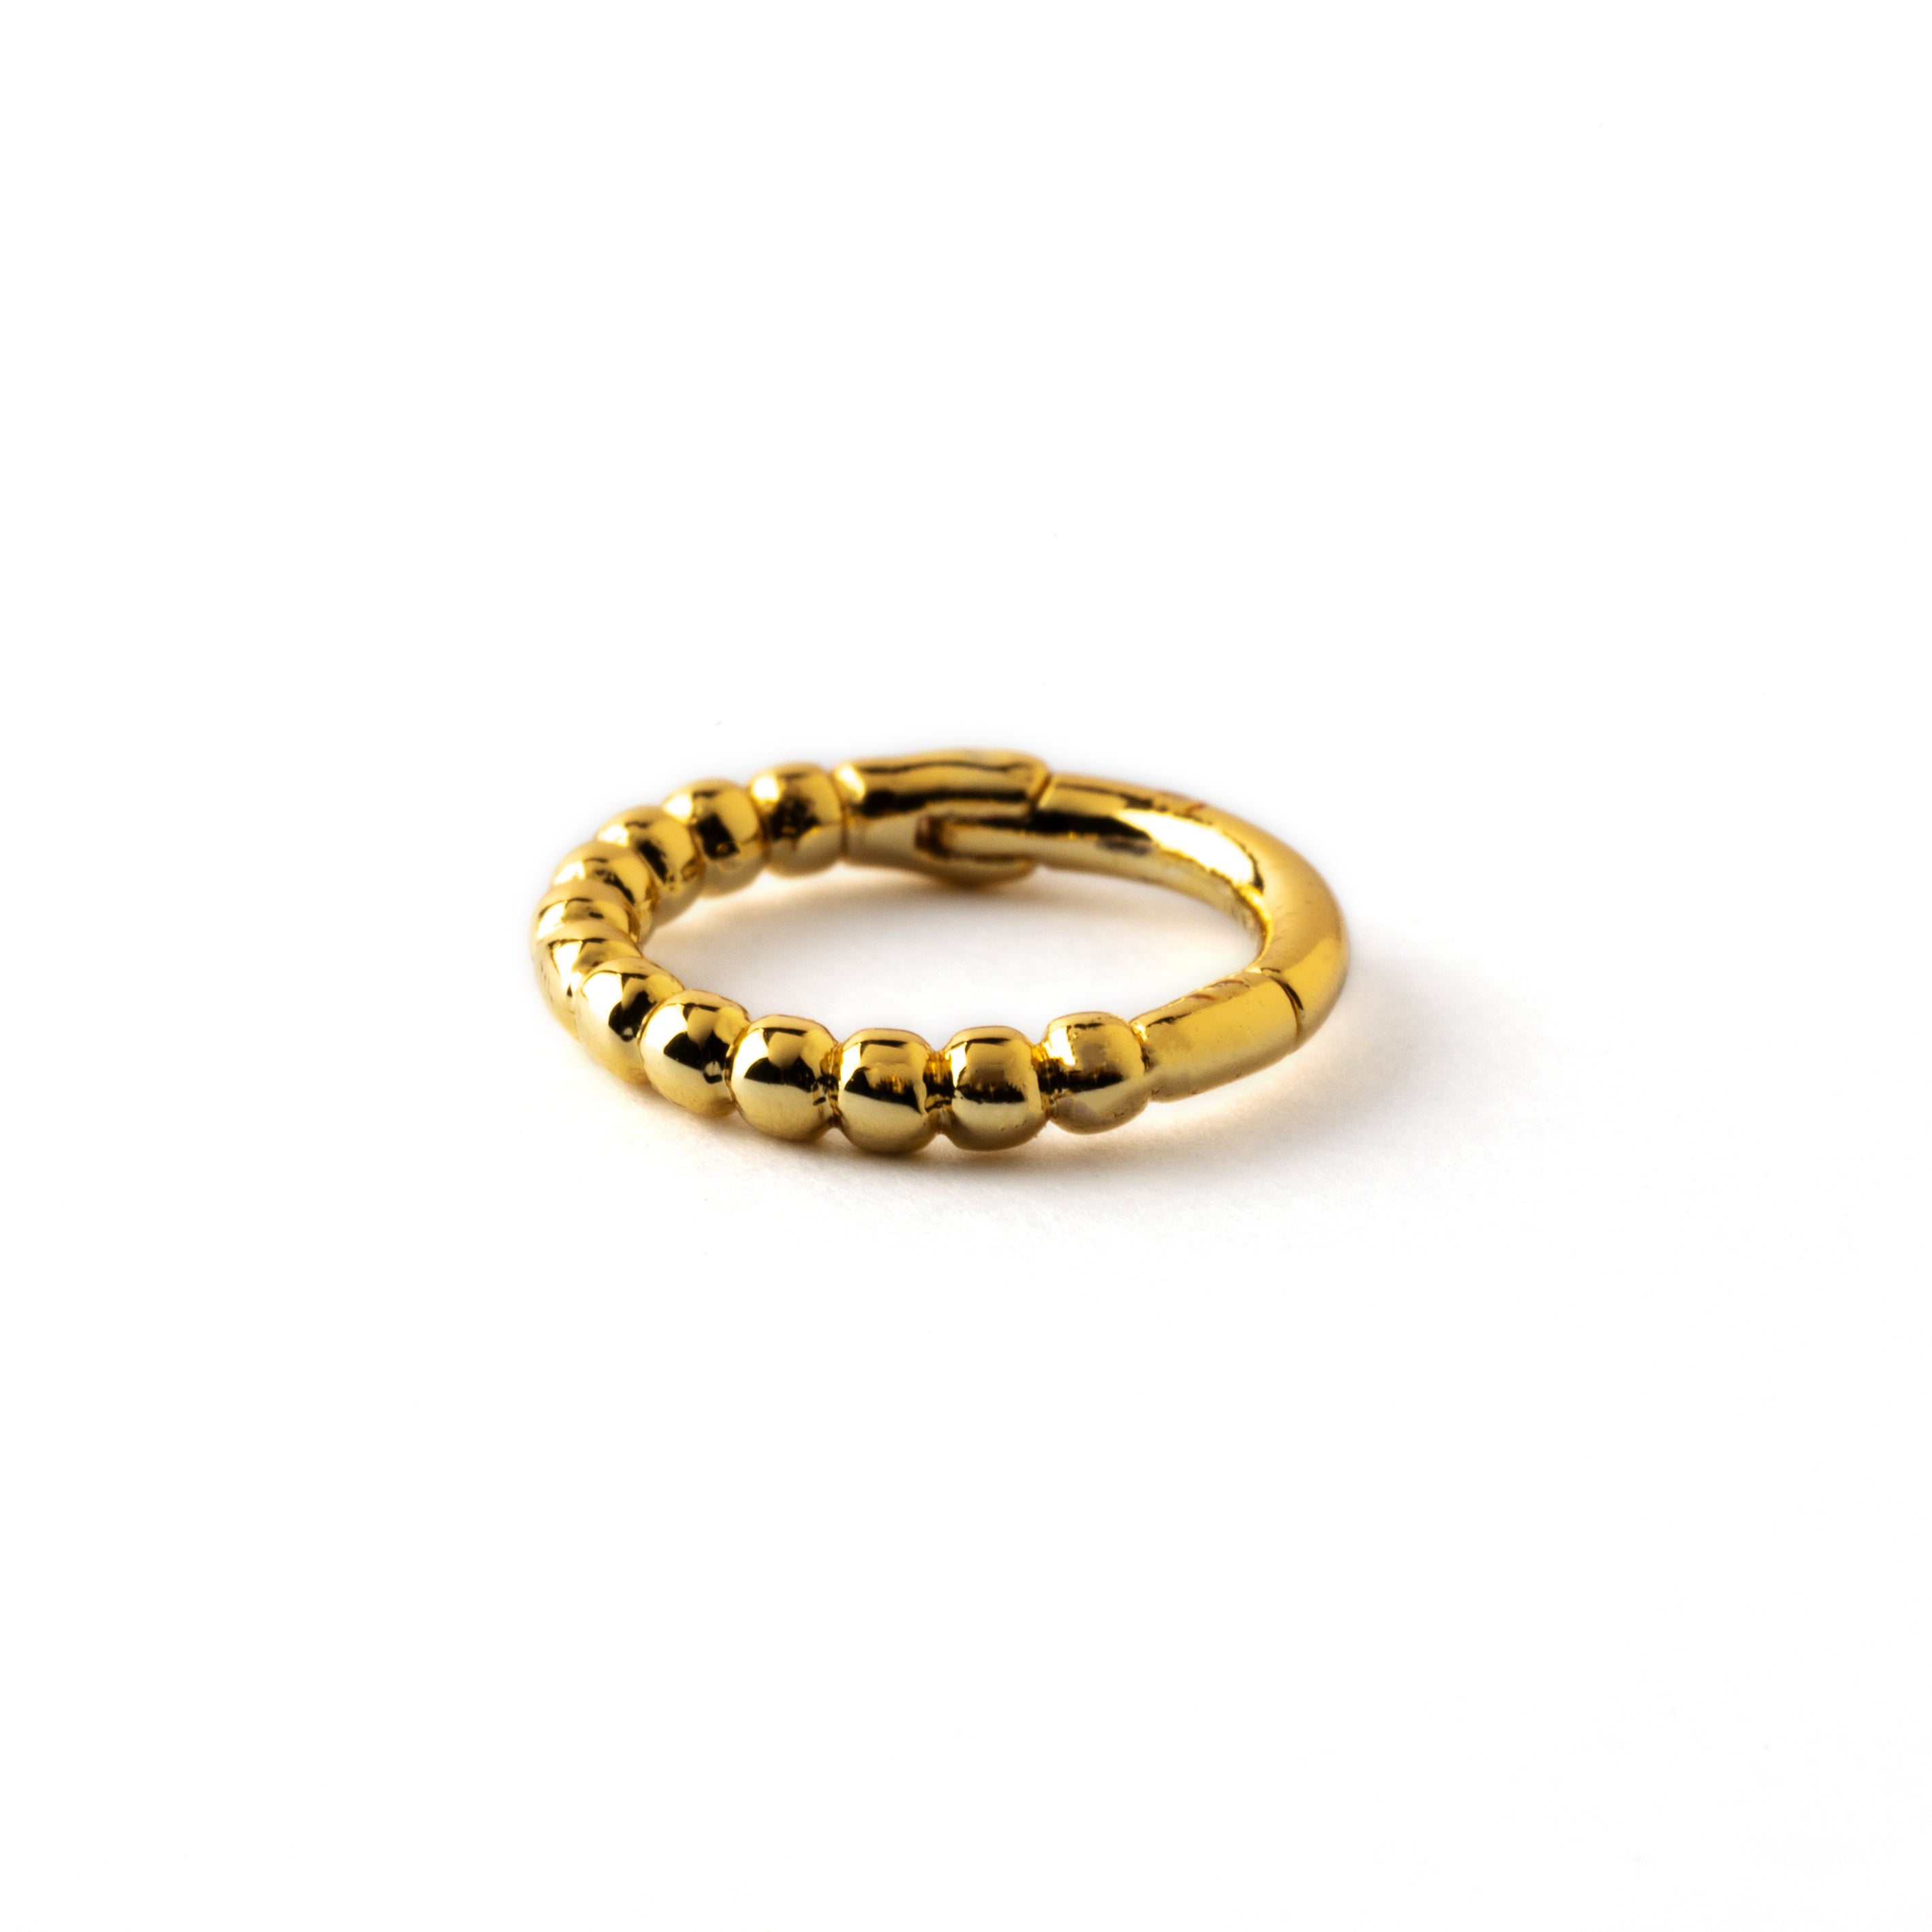 Golden surgical steel dotted piercing clicker ring down view